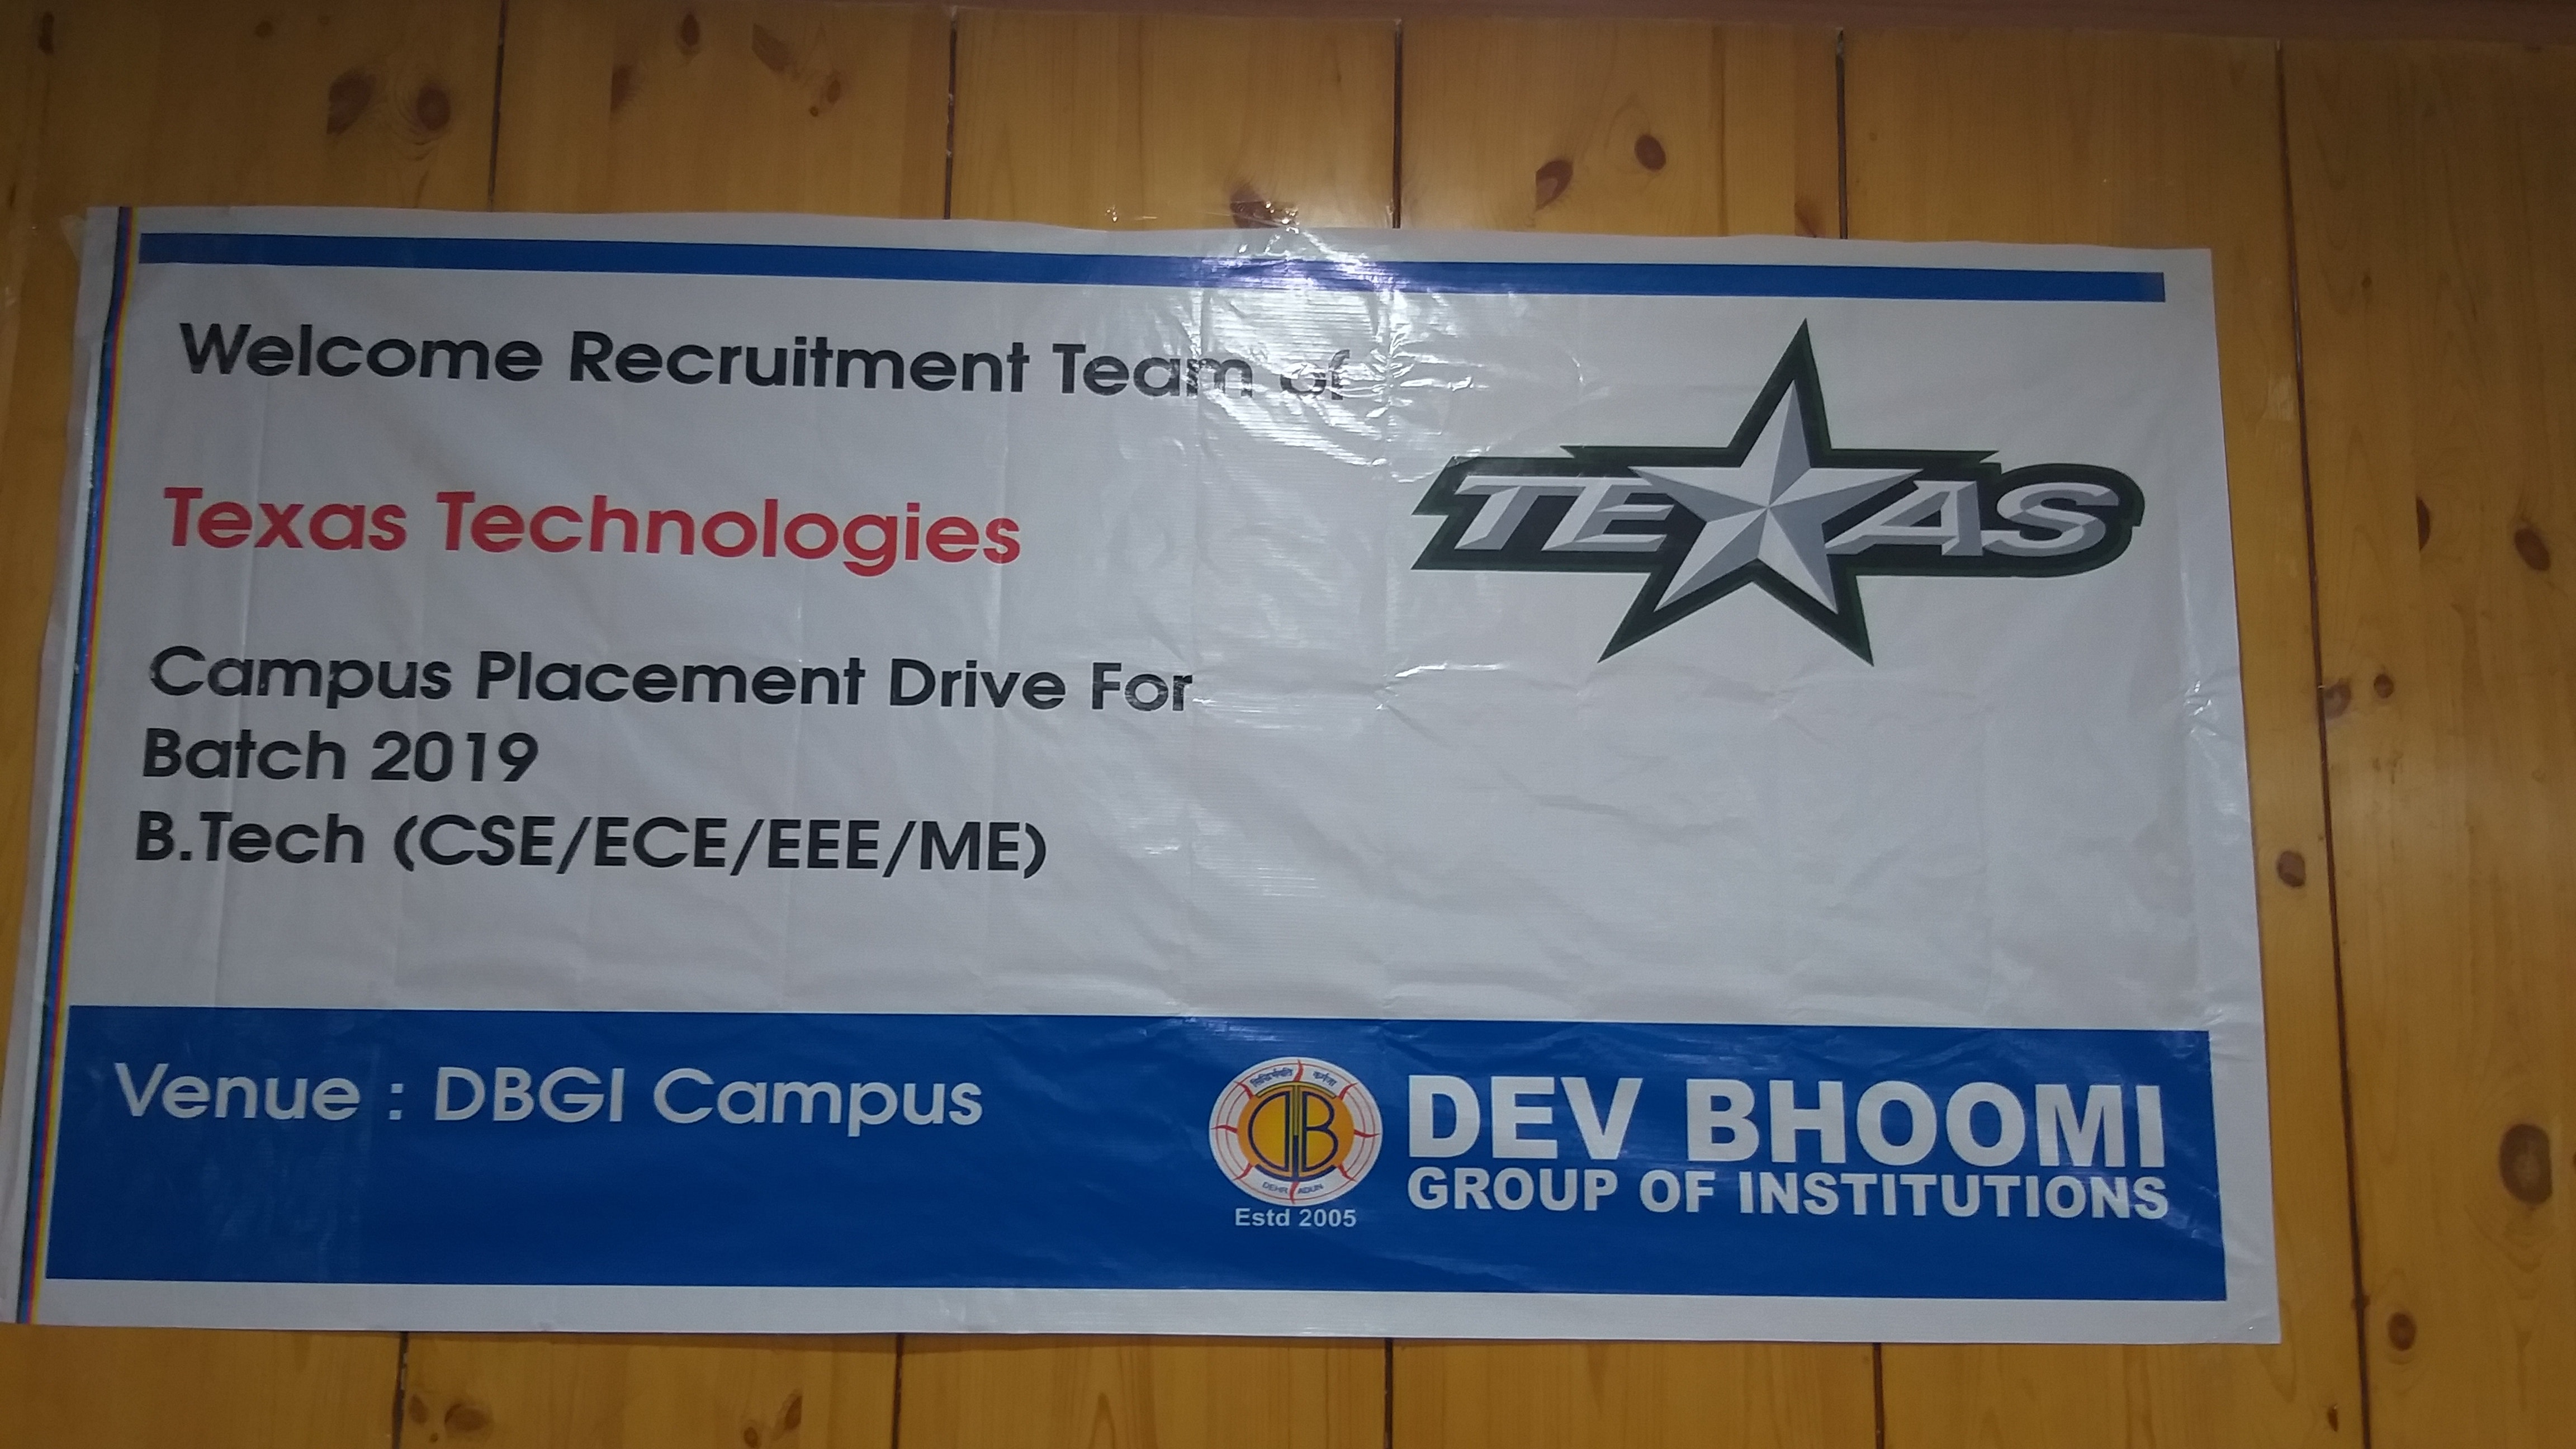 Campus Placement Drive by Texas